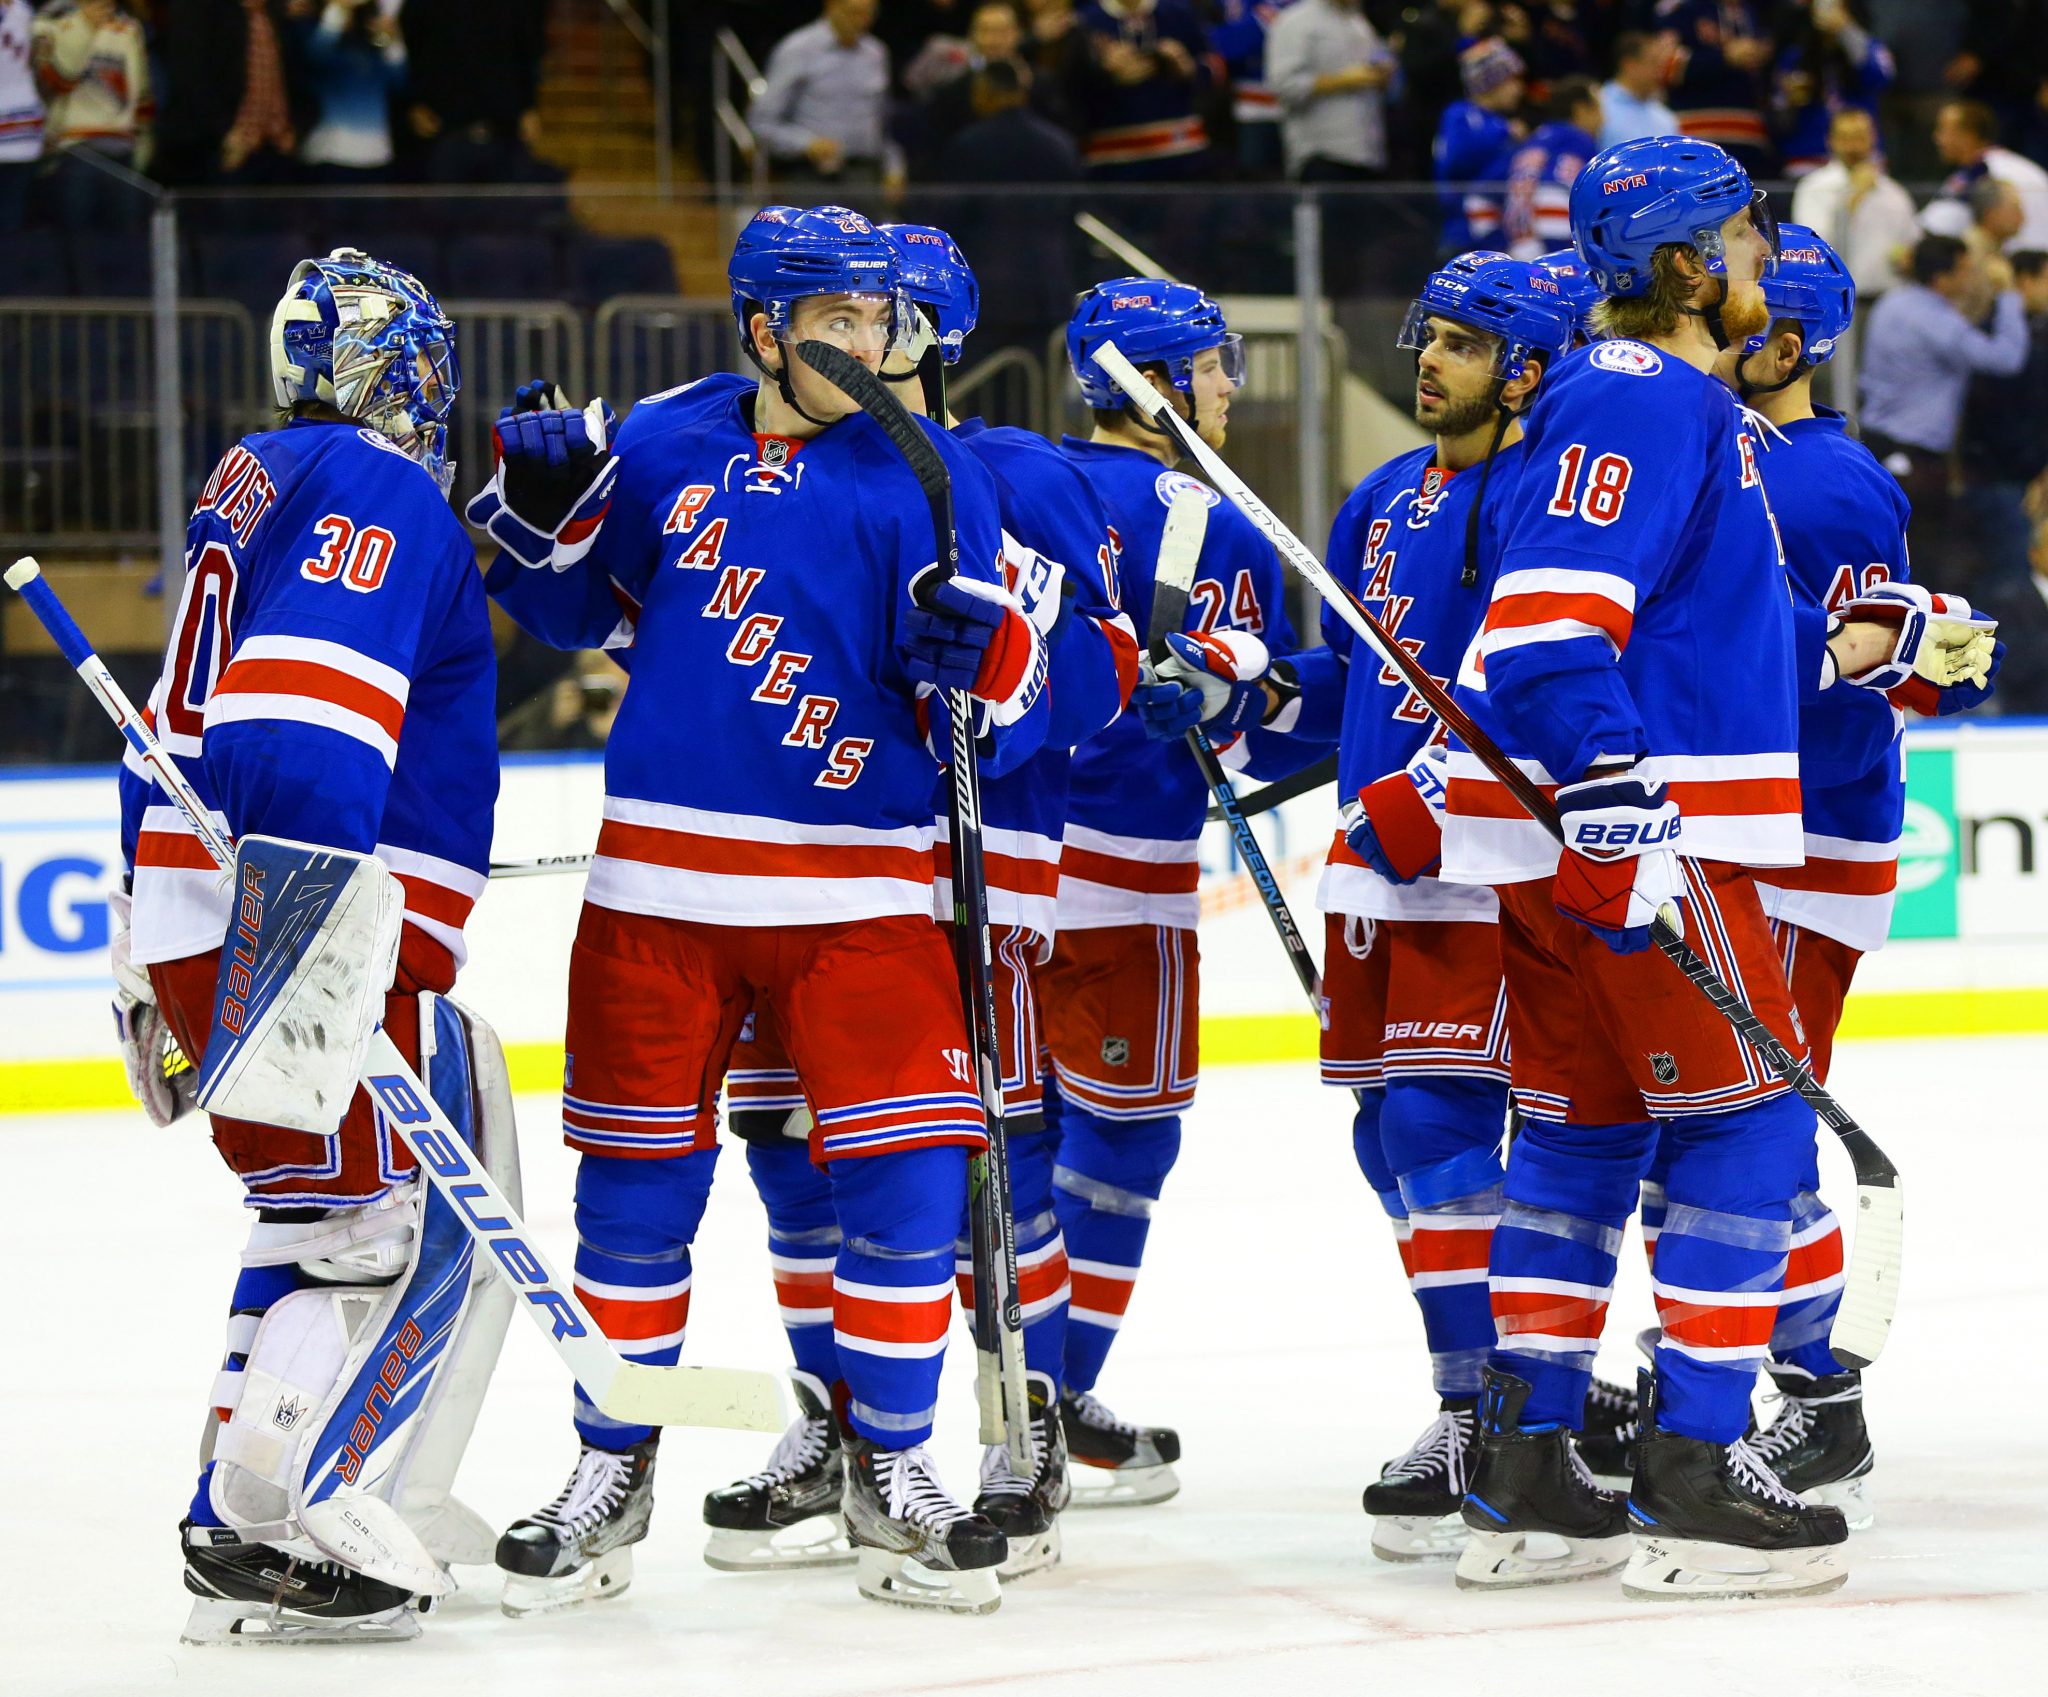 New York Rangers are most valuable NHL team, according to Forbes 